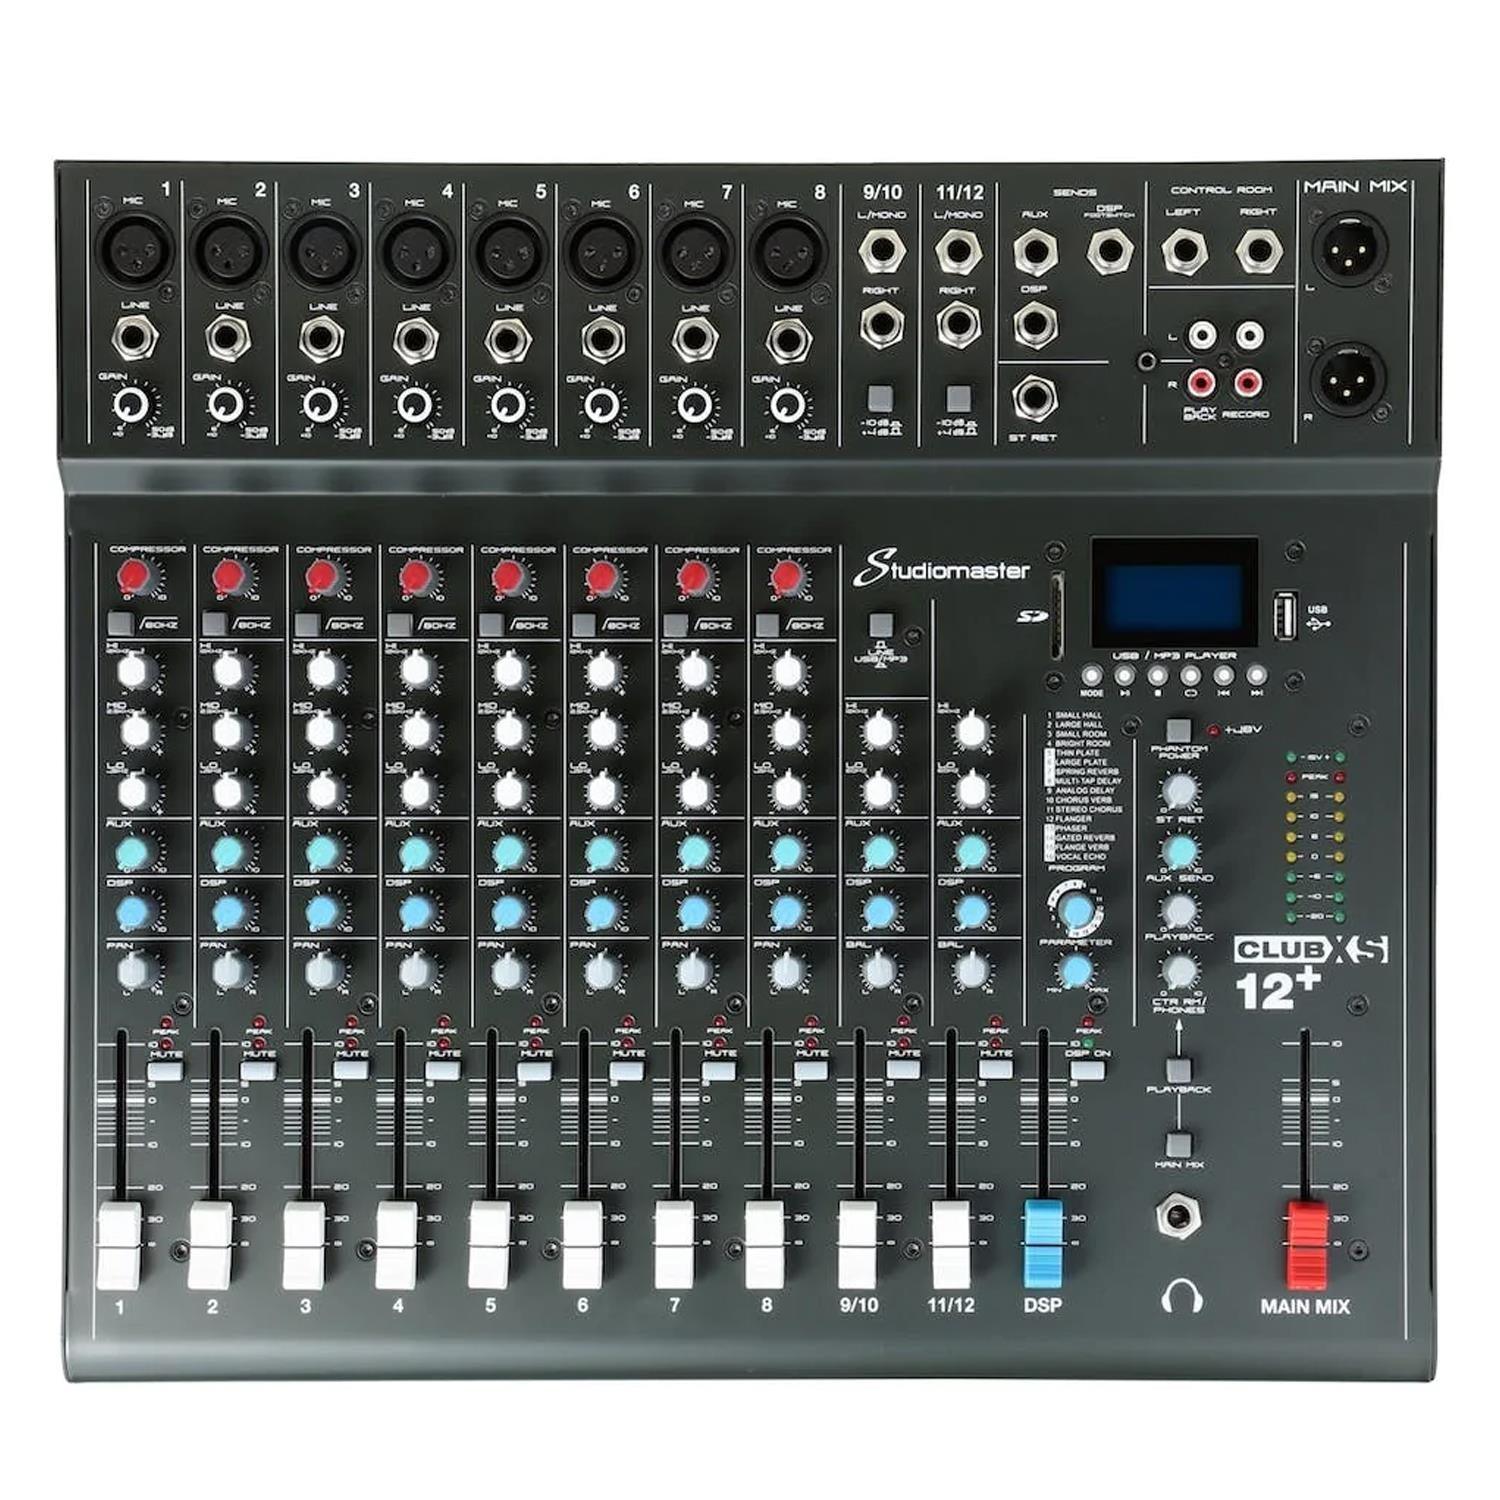 Studiomaster Club XS 12+ 10 Channel Mixing Desk - DY Pro Audio